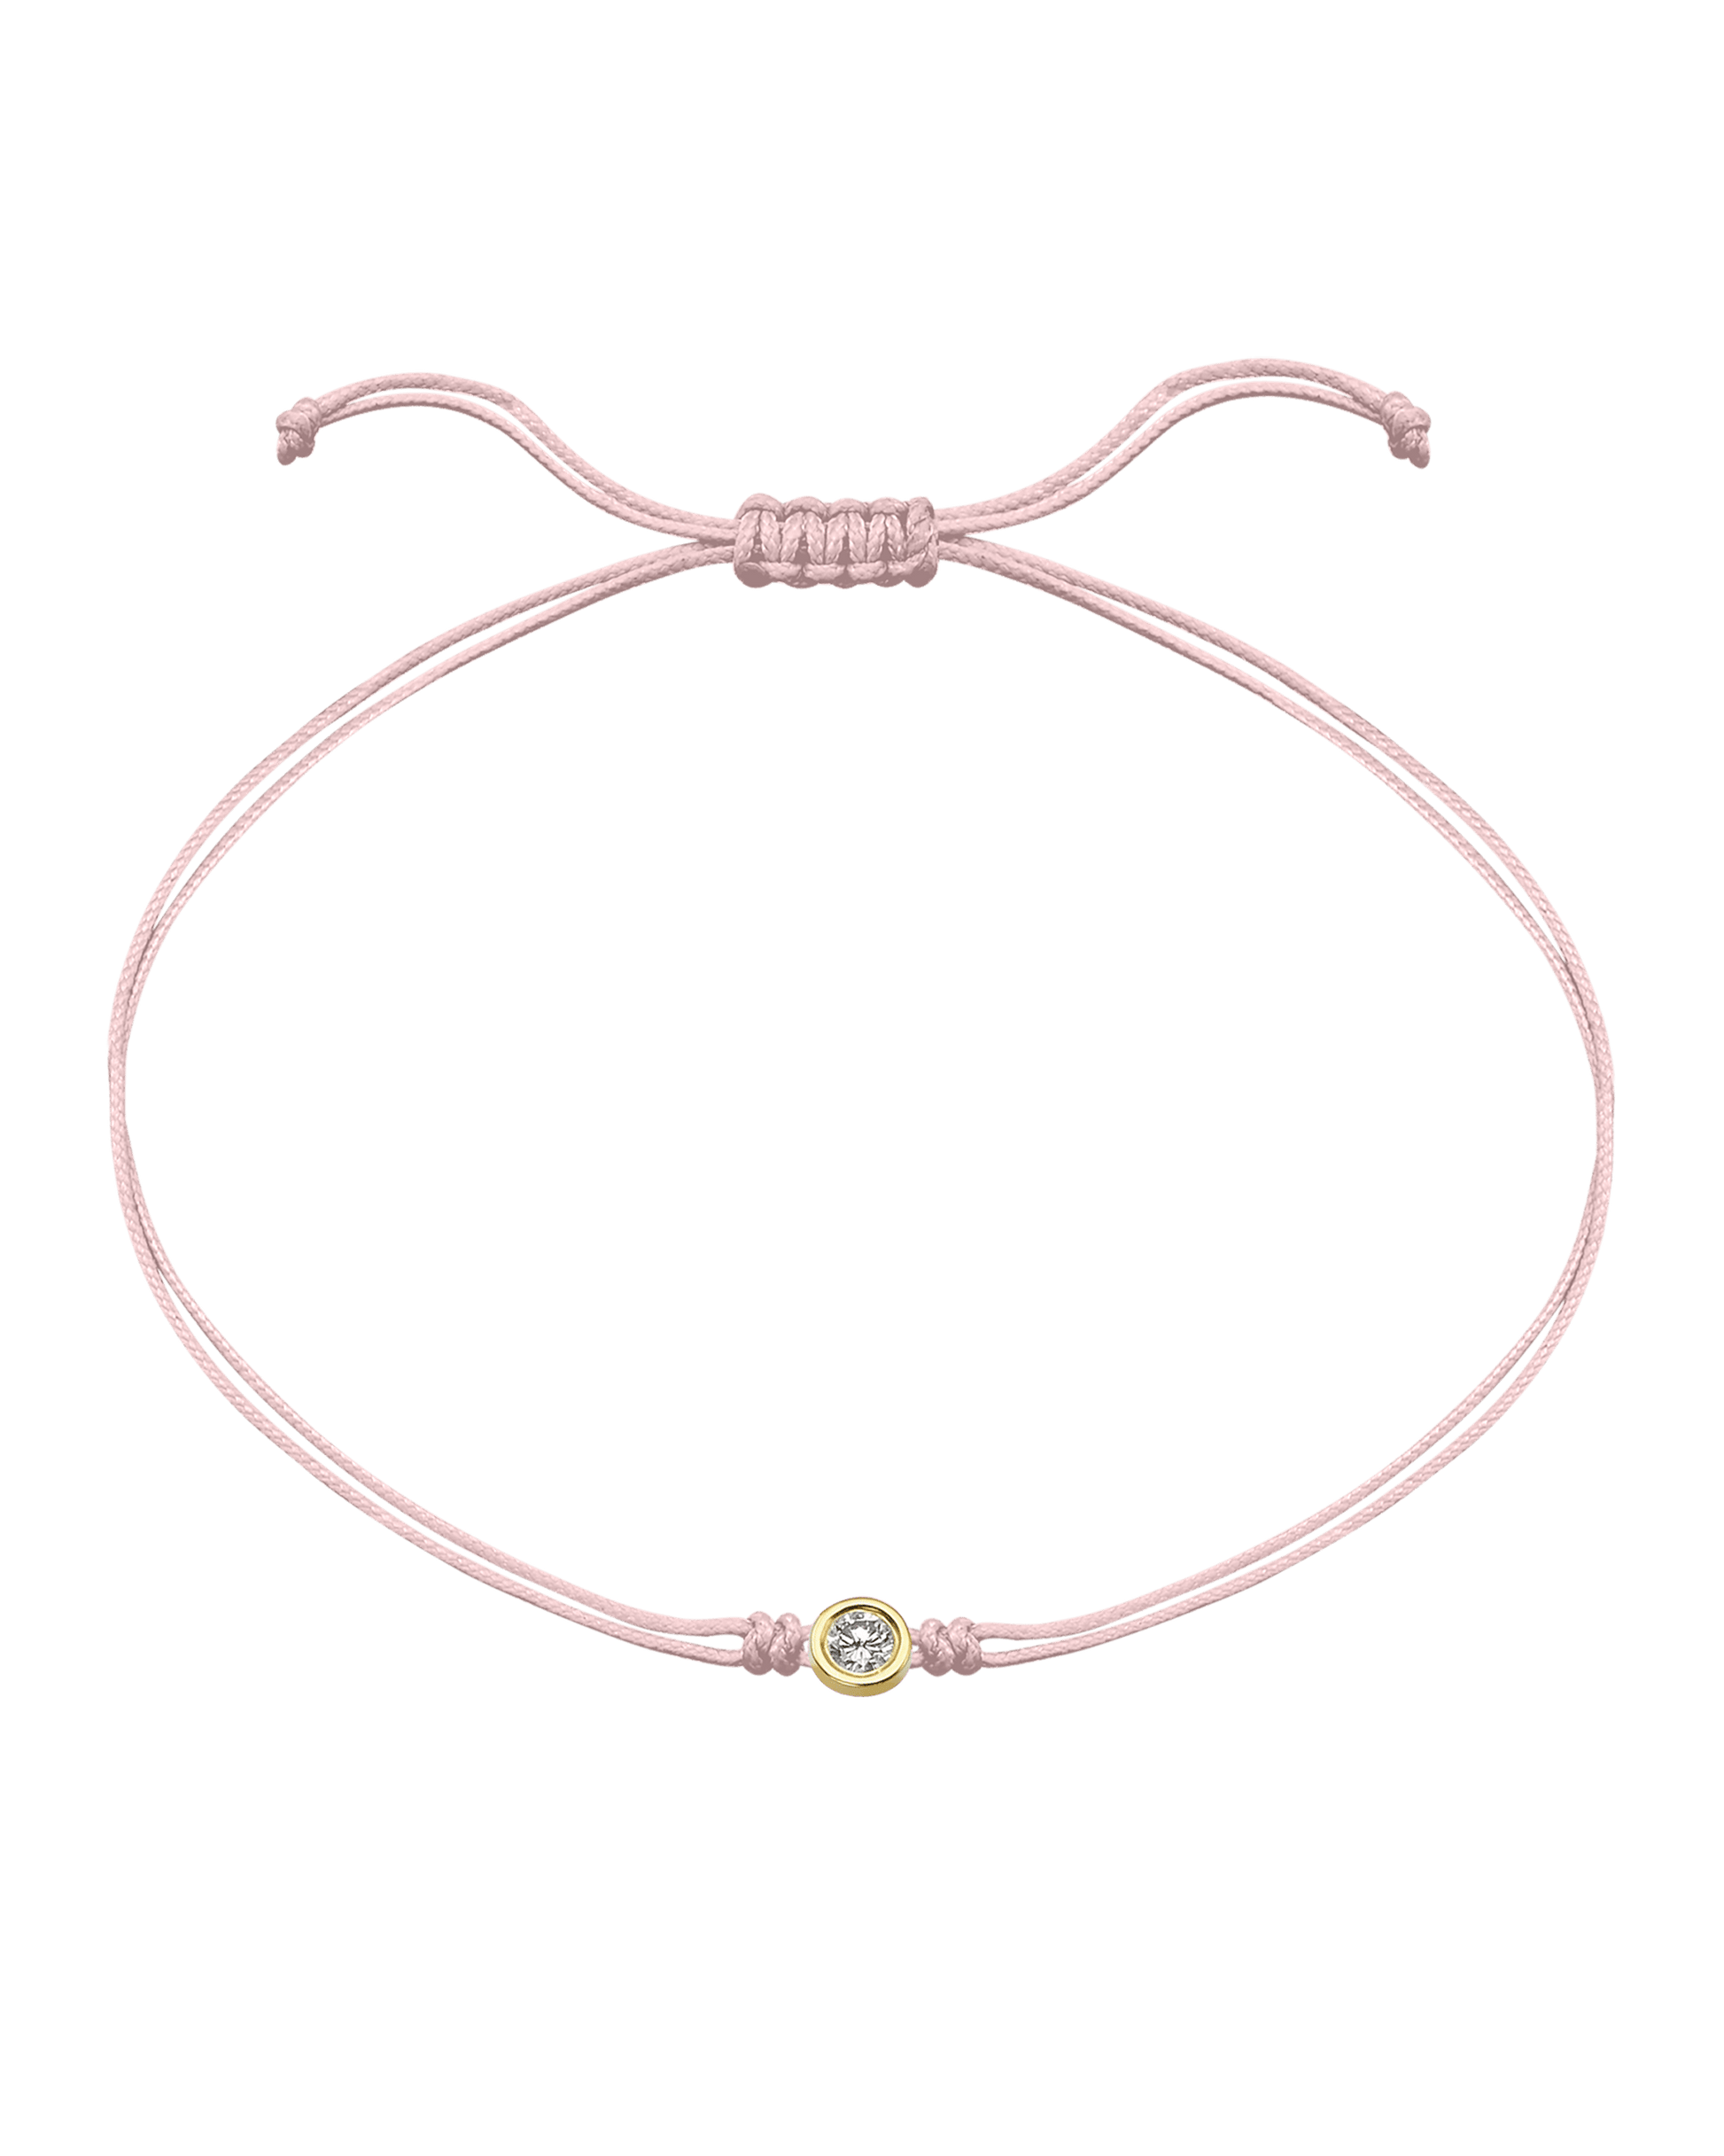 Summer Edition : The Classic String of Love - 14K Yellow Gold Bracelets magal-dev Strawberry Bellini - Light Pink Large: 0.10ct 